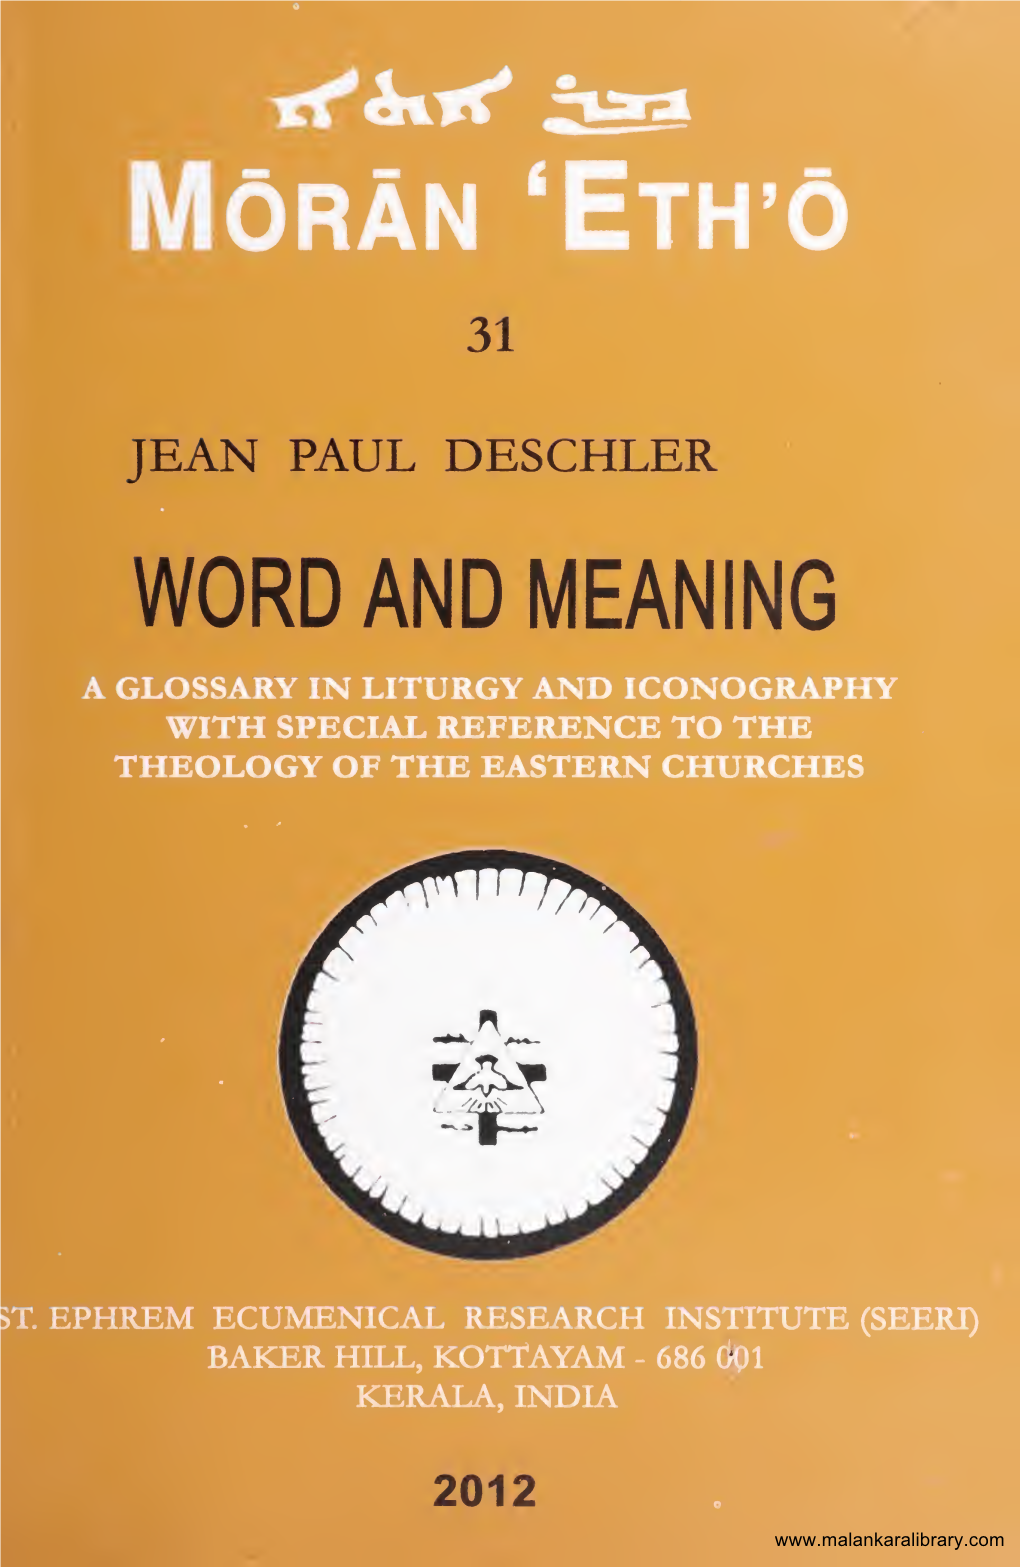 Word and Meaning a Glossary in Liturgy and Iconography with Special Reference to the Theology of the Eastern Churches